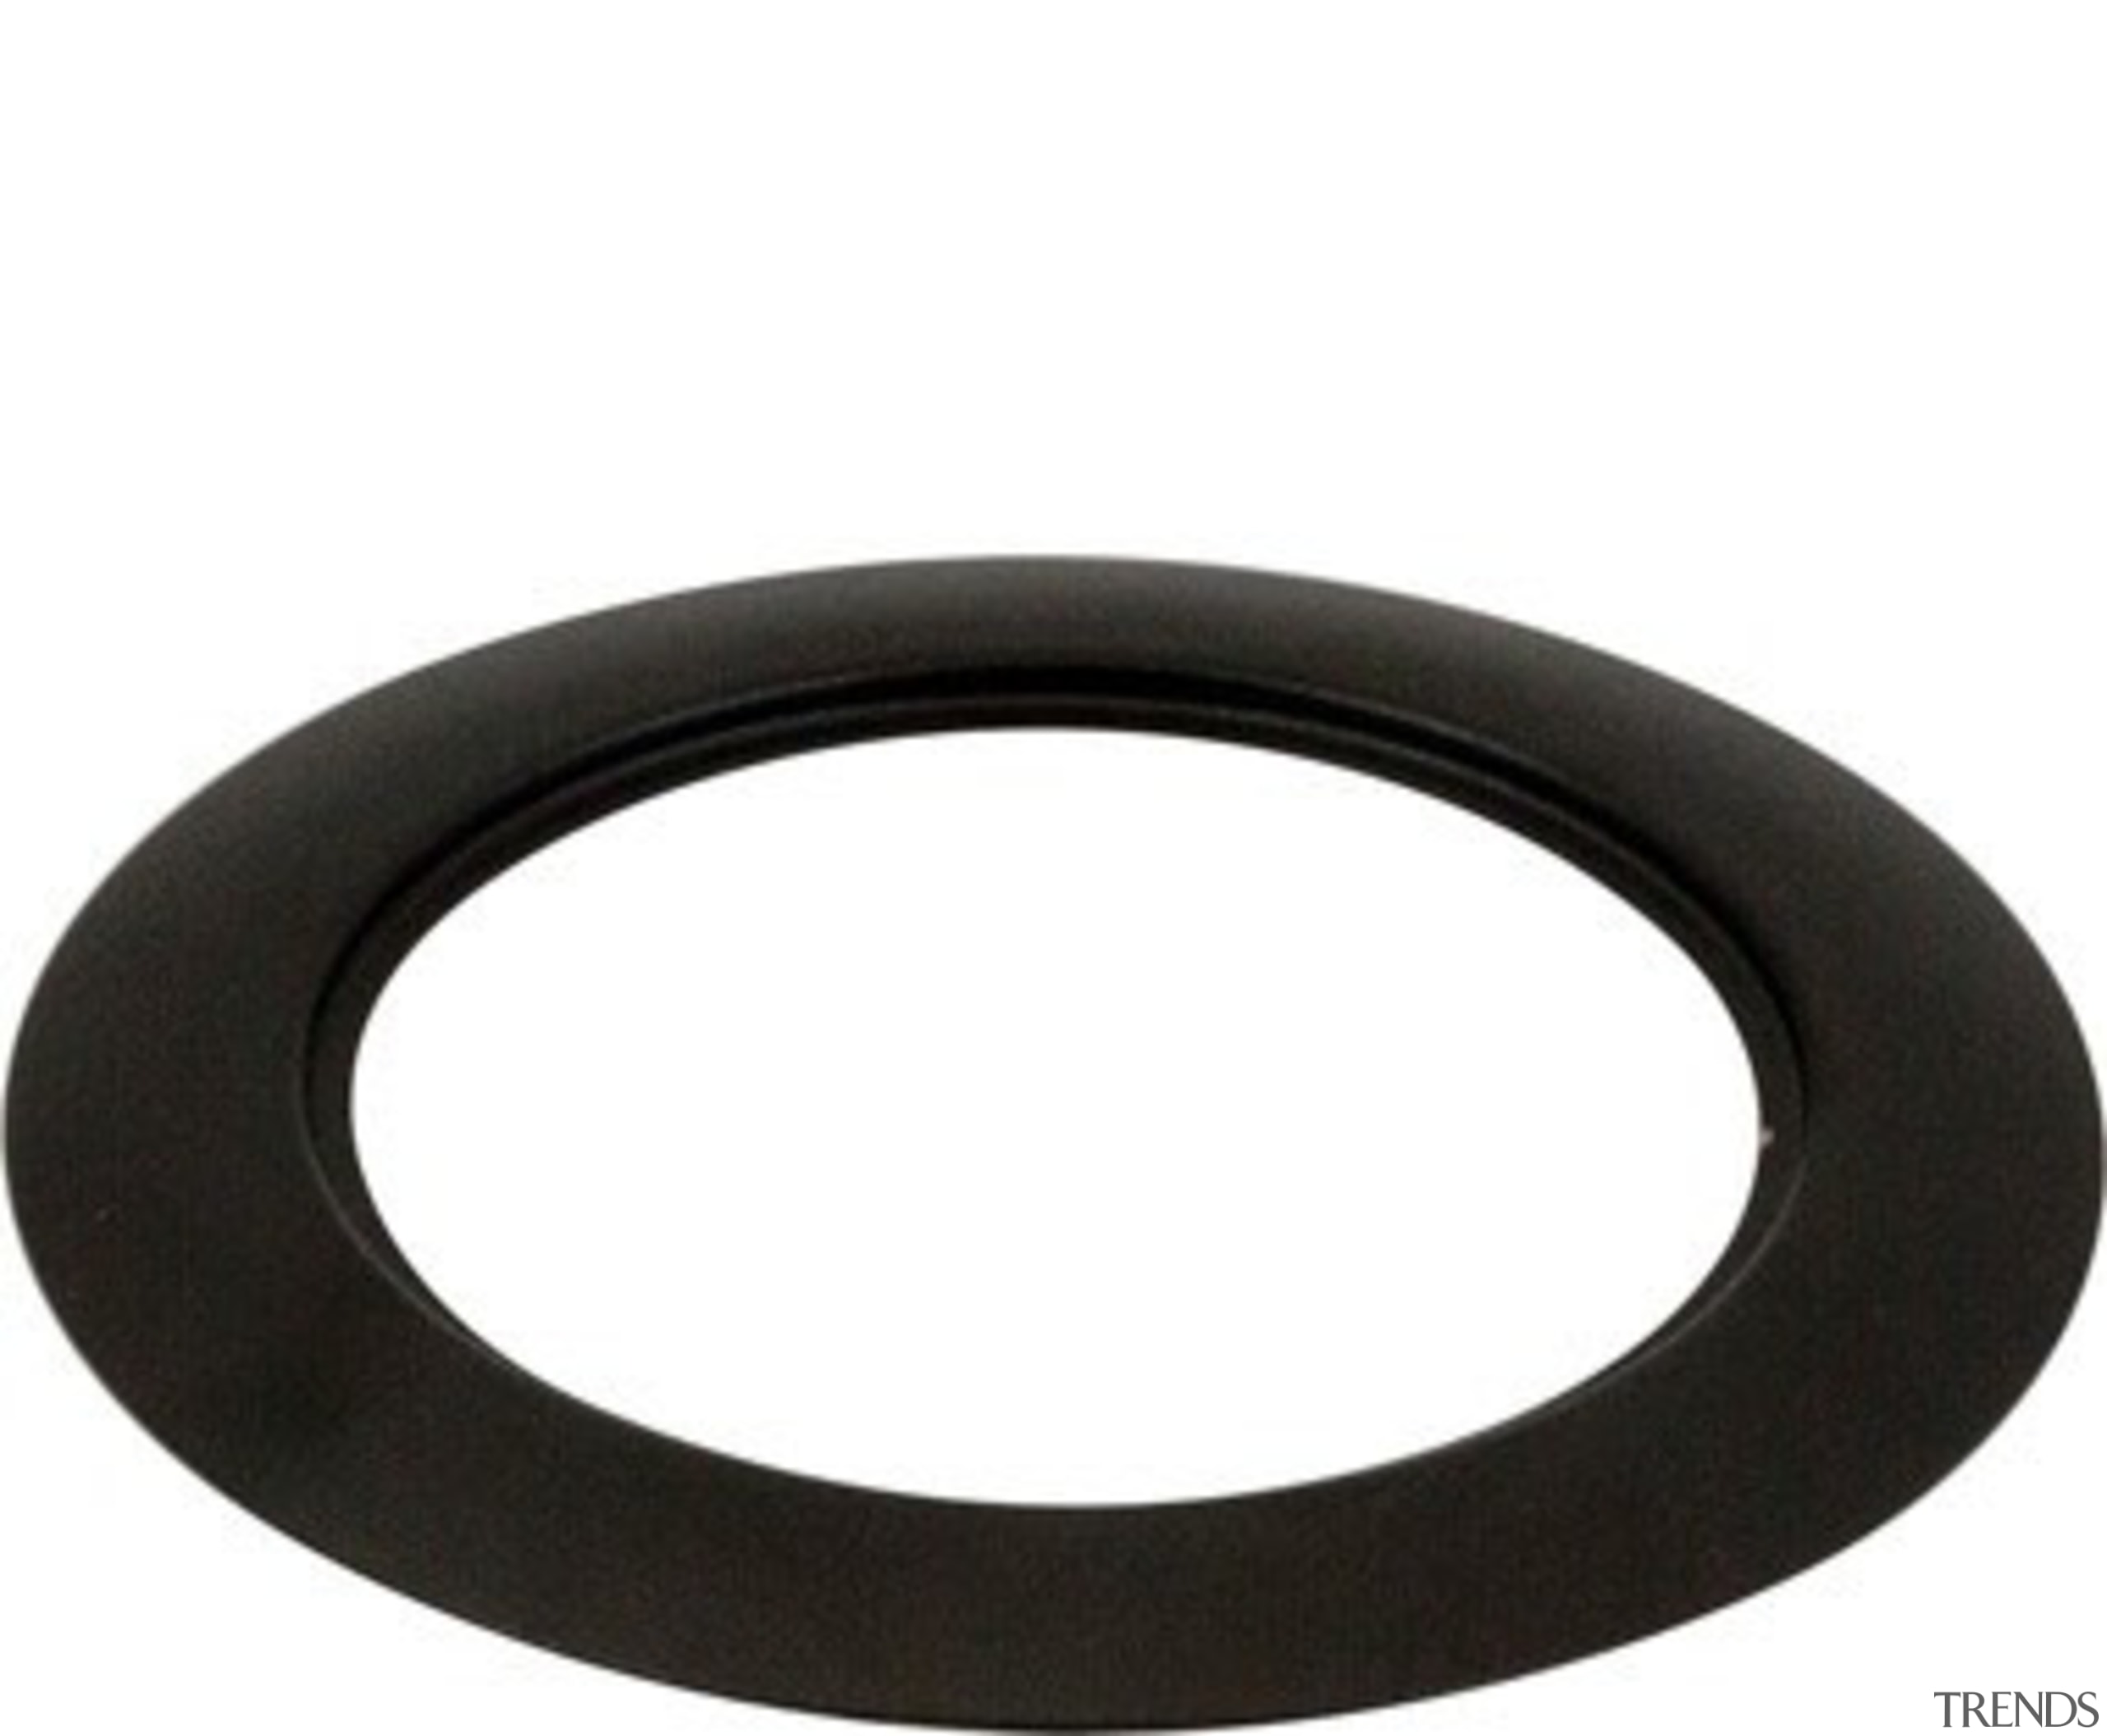 FeaturesThis Rehab Ring is the perfect product to circle, hardware, product design, white, black